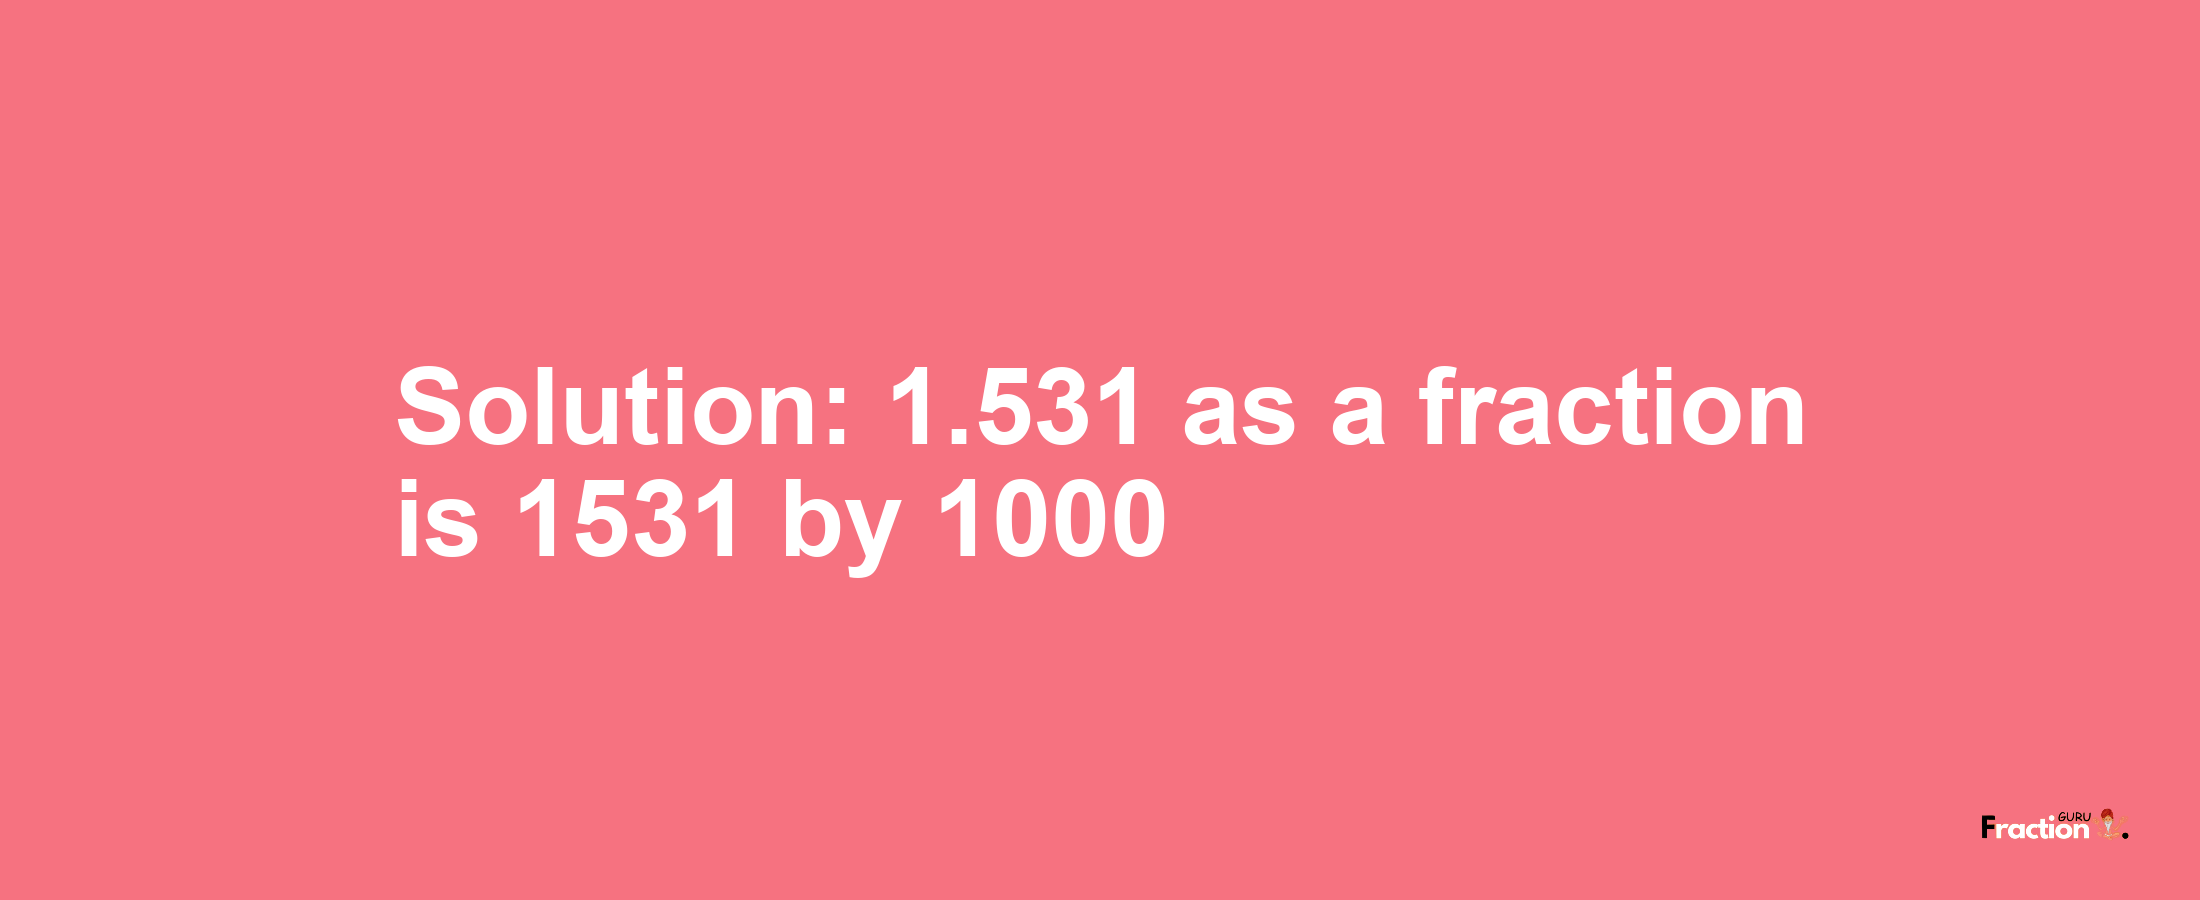 Solution:1.531 as a fraction is 1531/1000